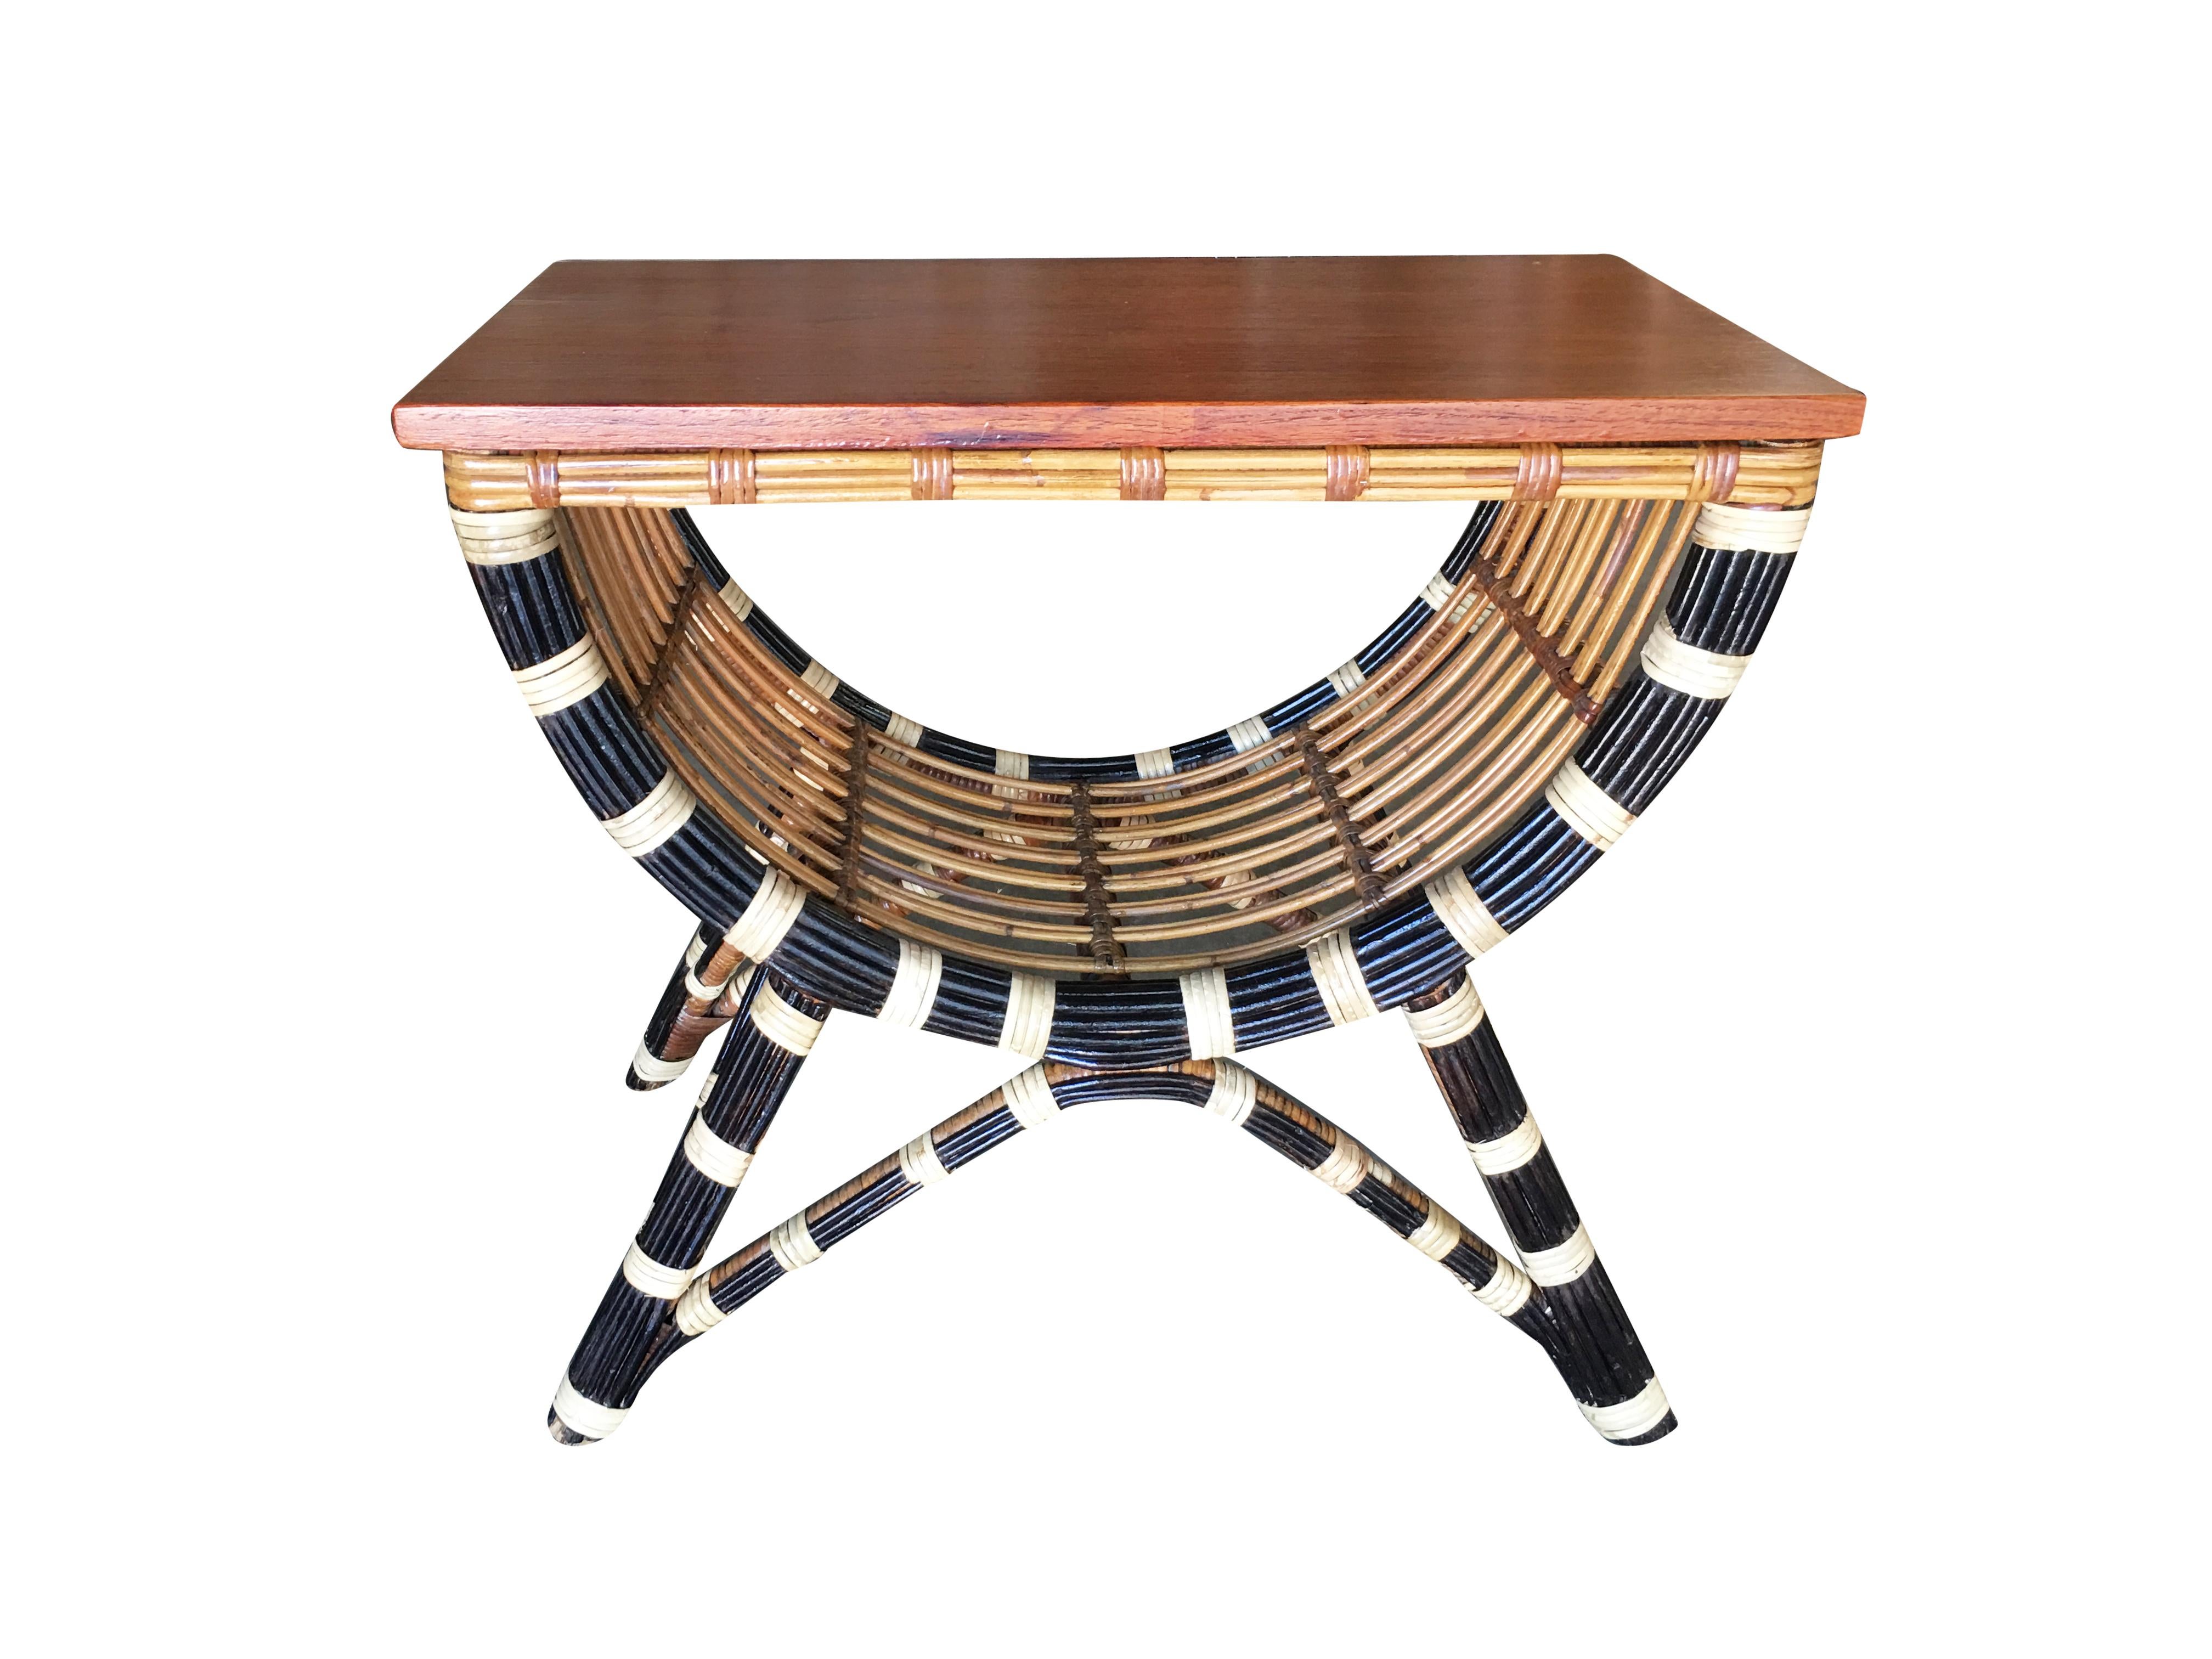 Unique striped Albini style side table with mahogany tabletop featuring a unique black and white striped stick rattan base.

Restored to new for you.

All rattan, bamboo and wicker furniture has been painstakingly refurbished to the highest